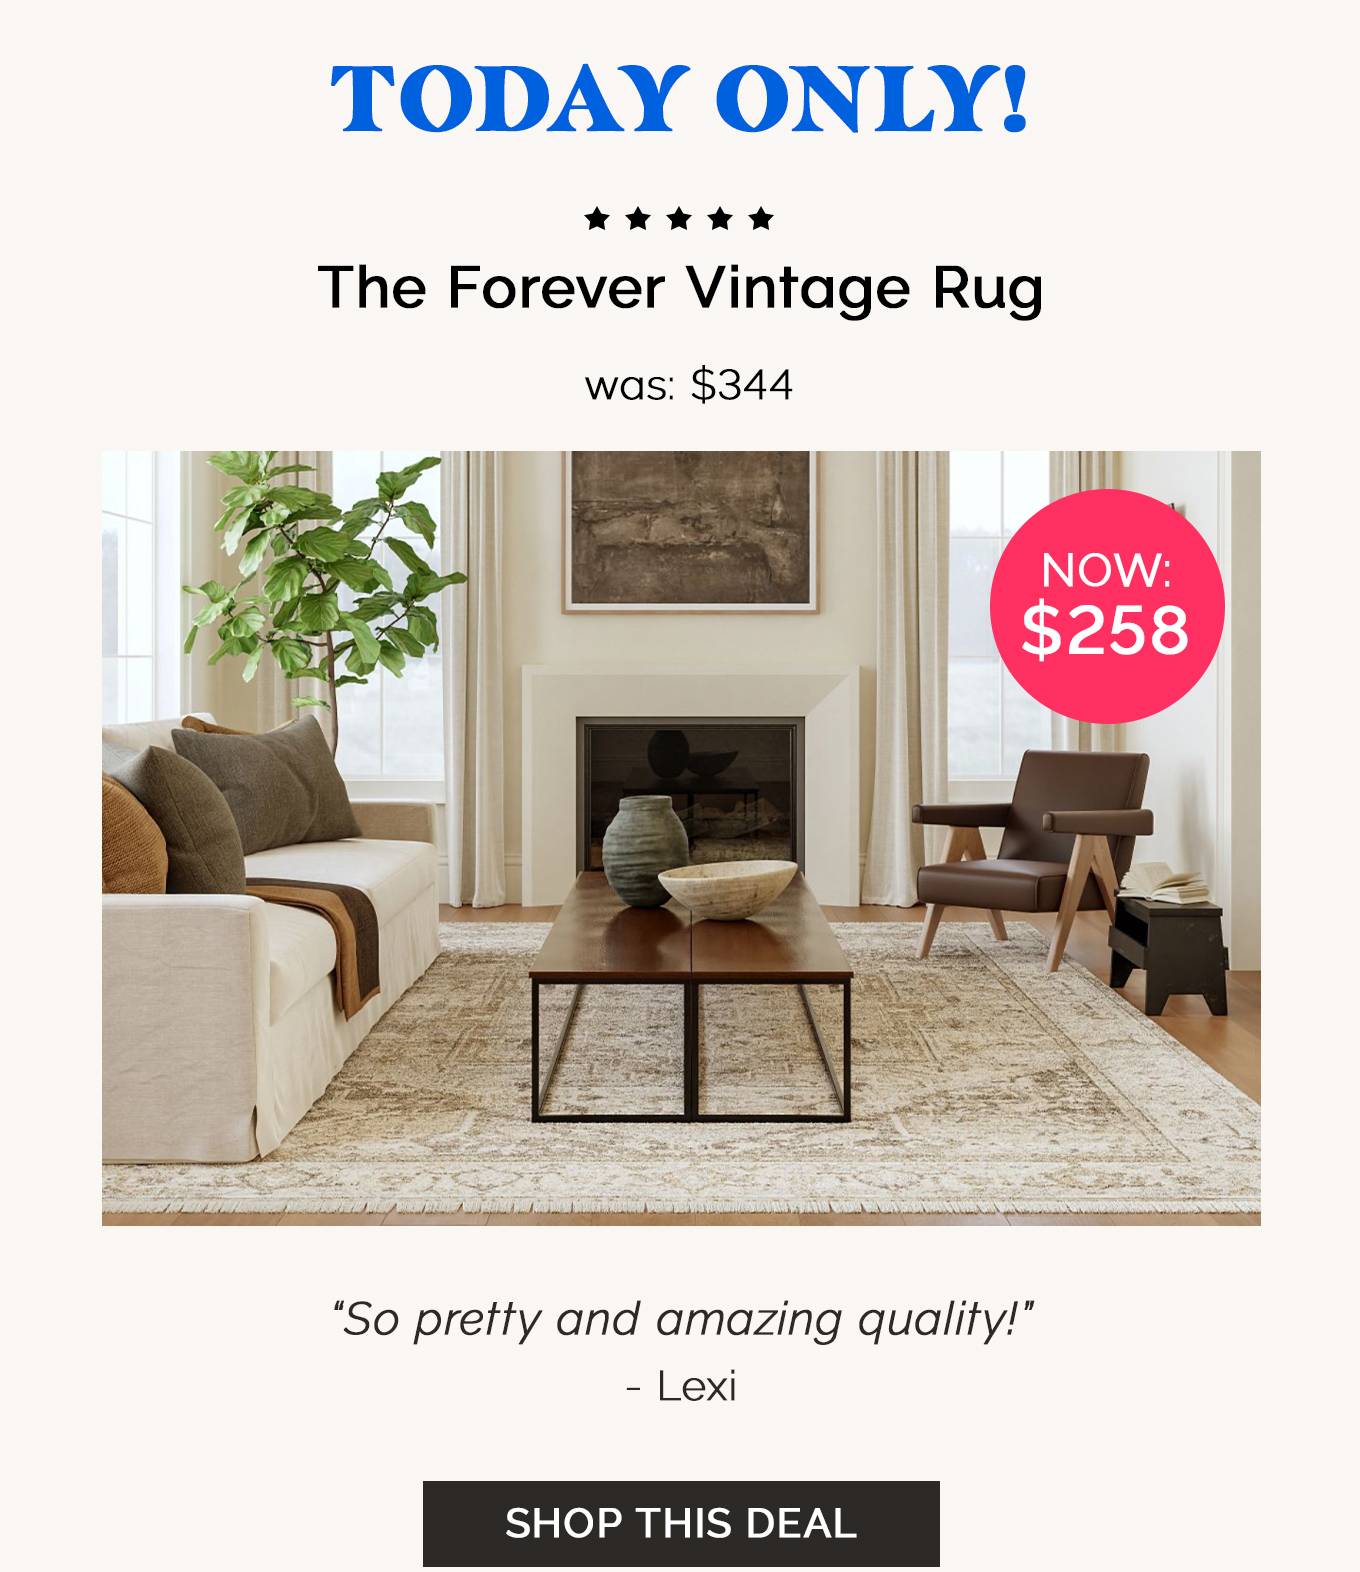 TODAY ONLY! The Forever Vintage Rug | Shop This Deal